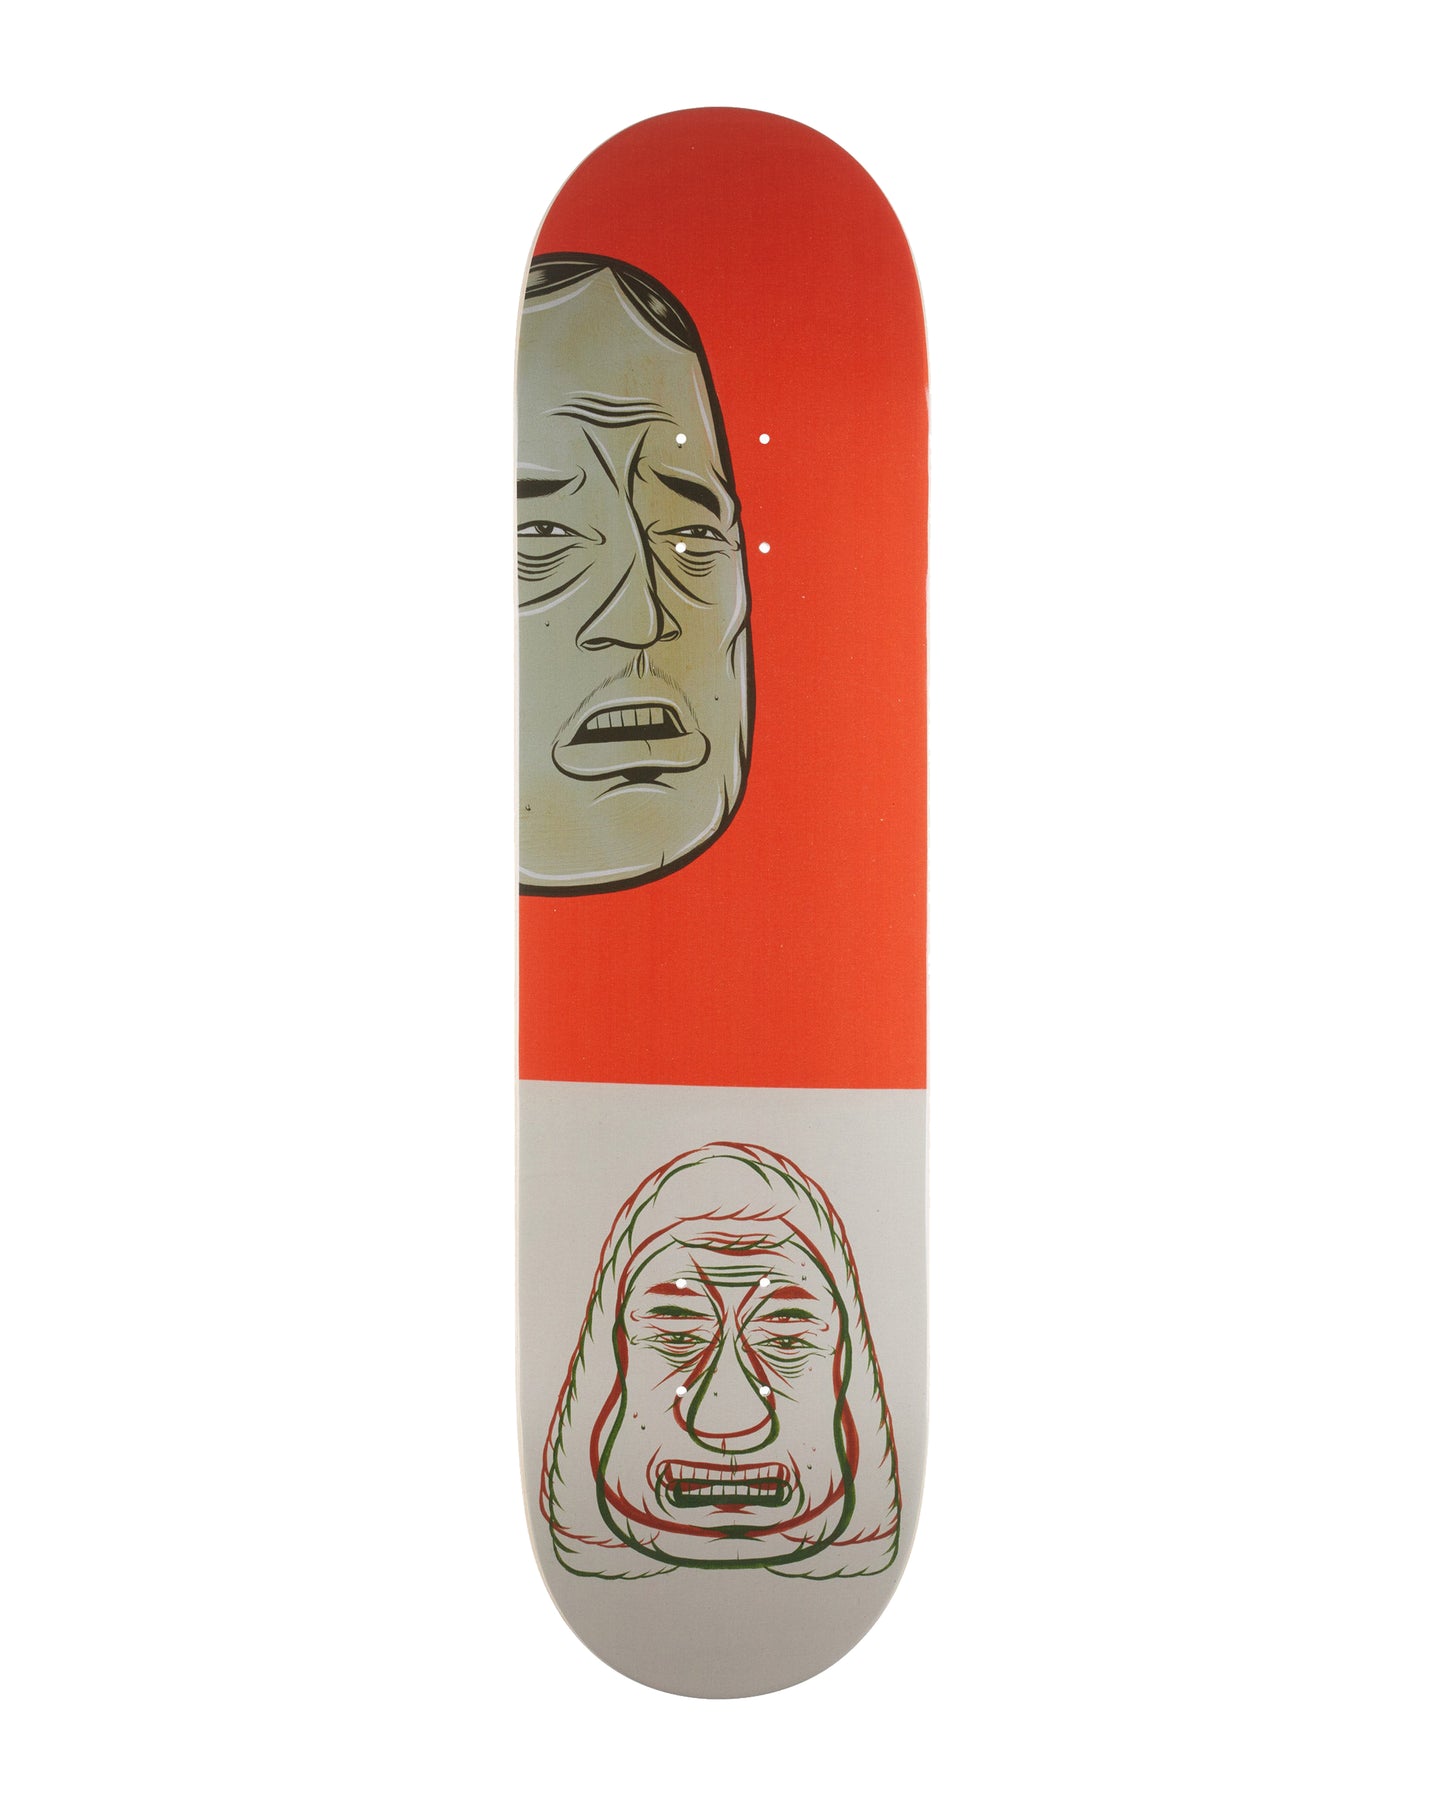 8.125 BAKER X BARRY MCGEE DOLLIN COLLECTORS DECK